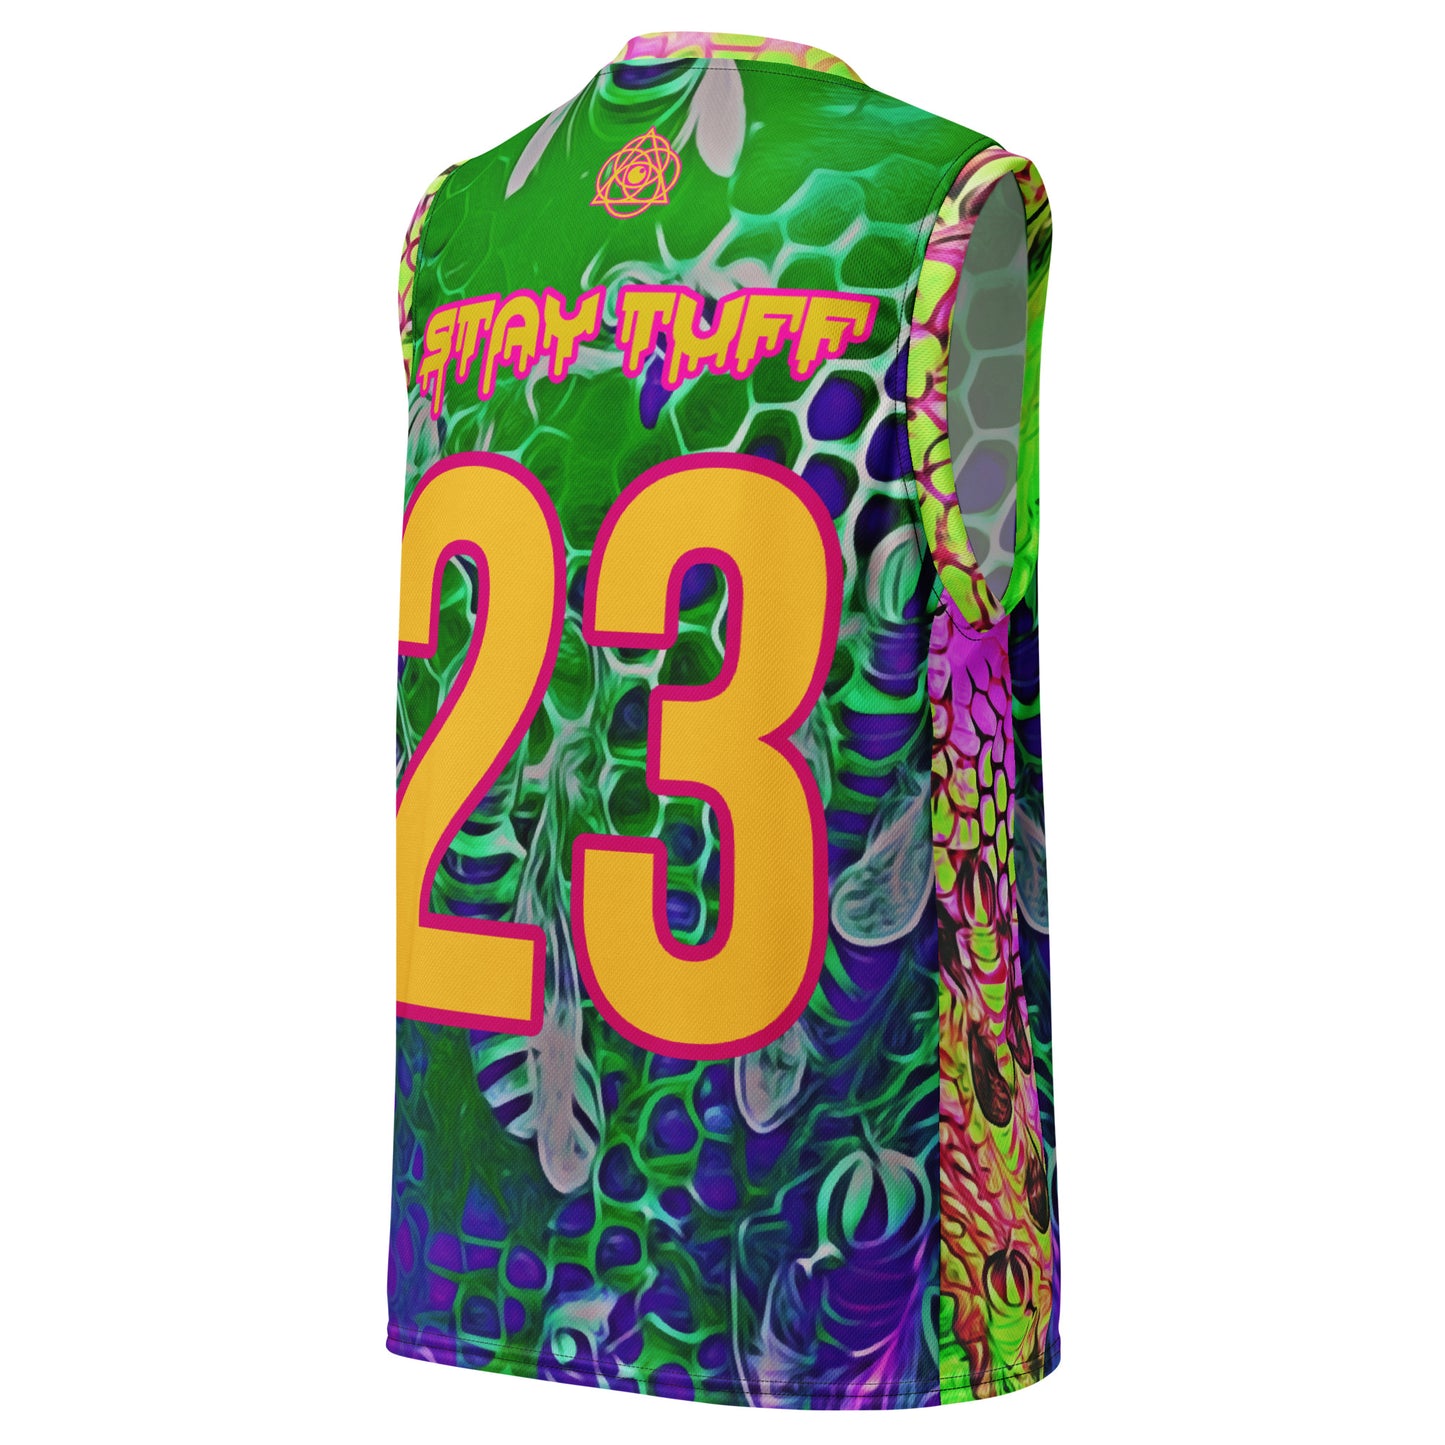 BEEHIVE (Electric Forest Exclusive Unisex Basketball Jersey)